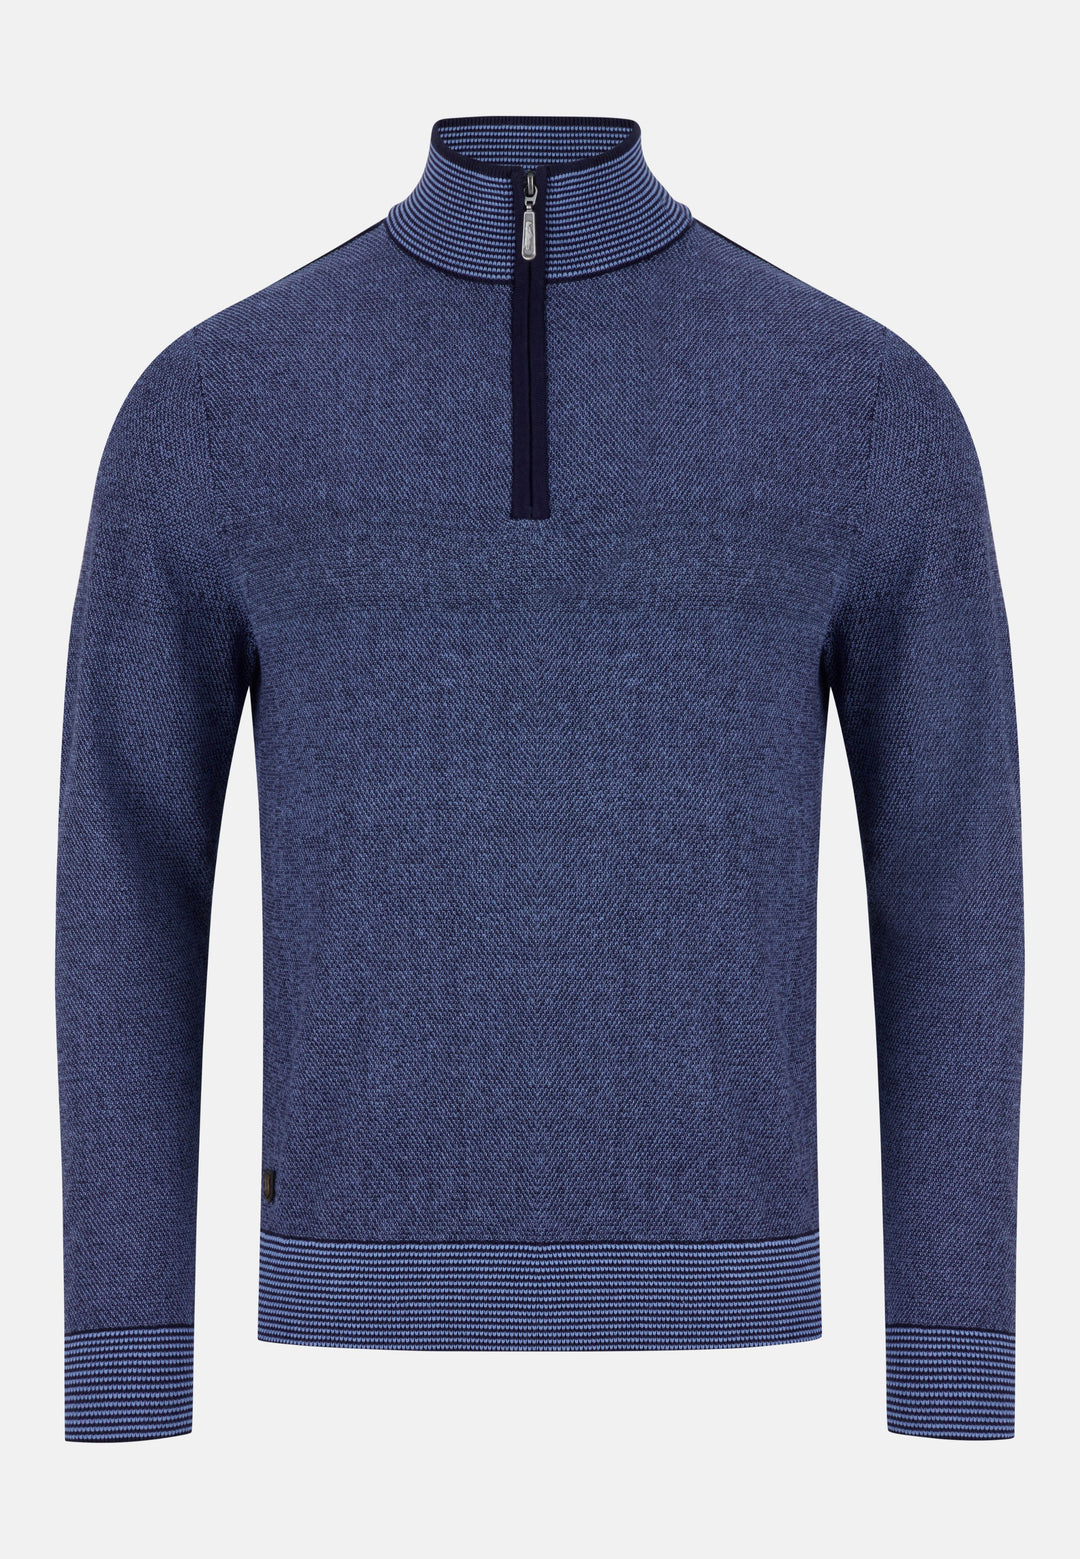 A 6th Sense Men's blue-and-navy-mix knitted cotton jumper with navy trim detail and striped detail on collar, cuffs, and hem.